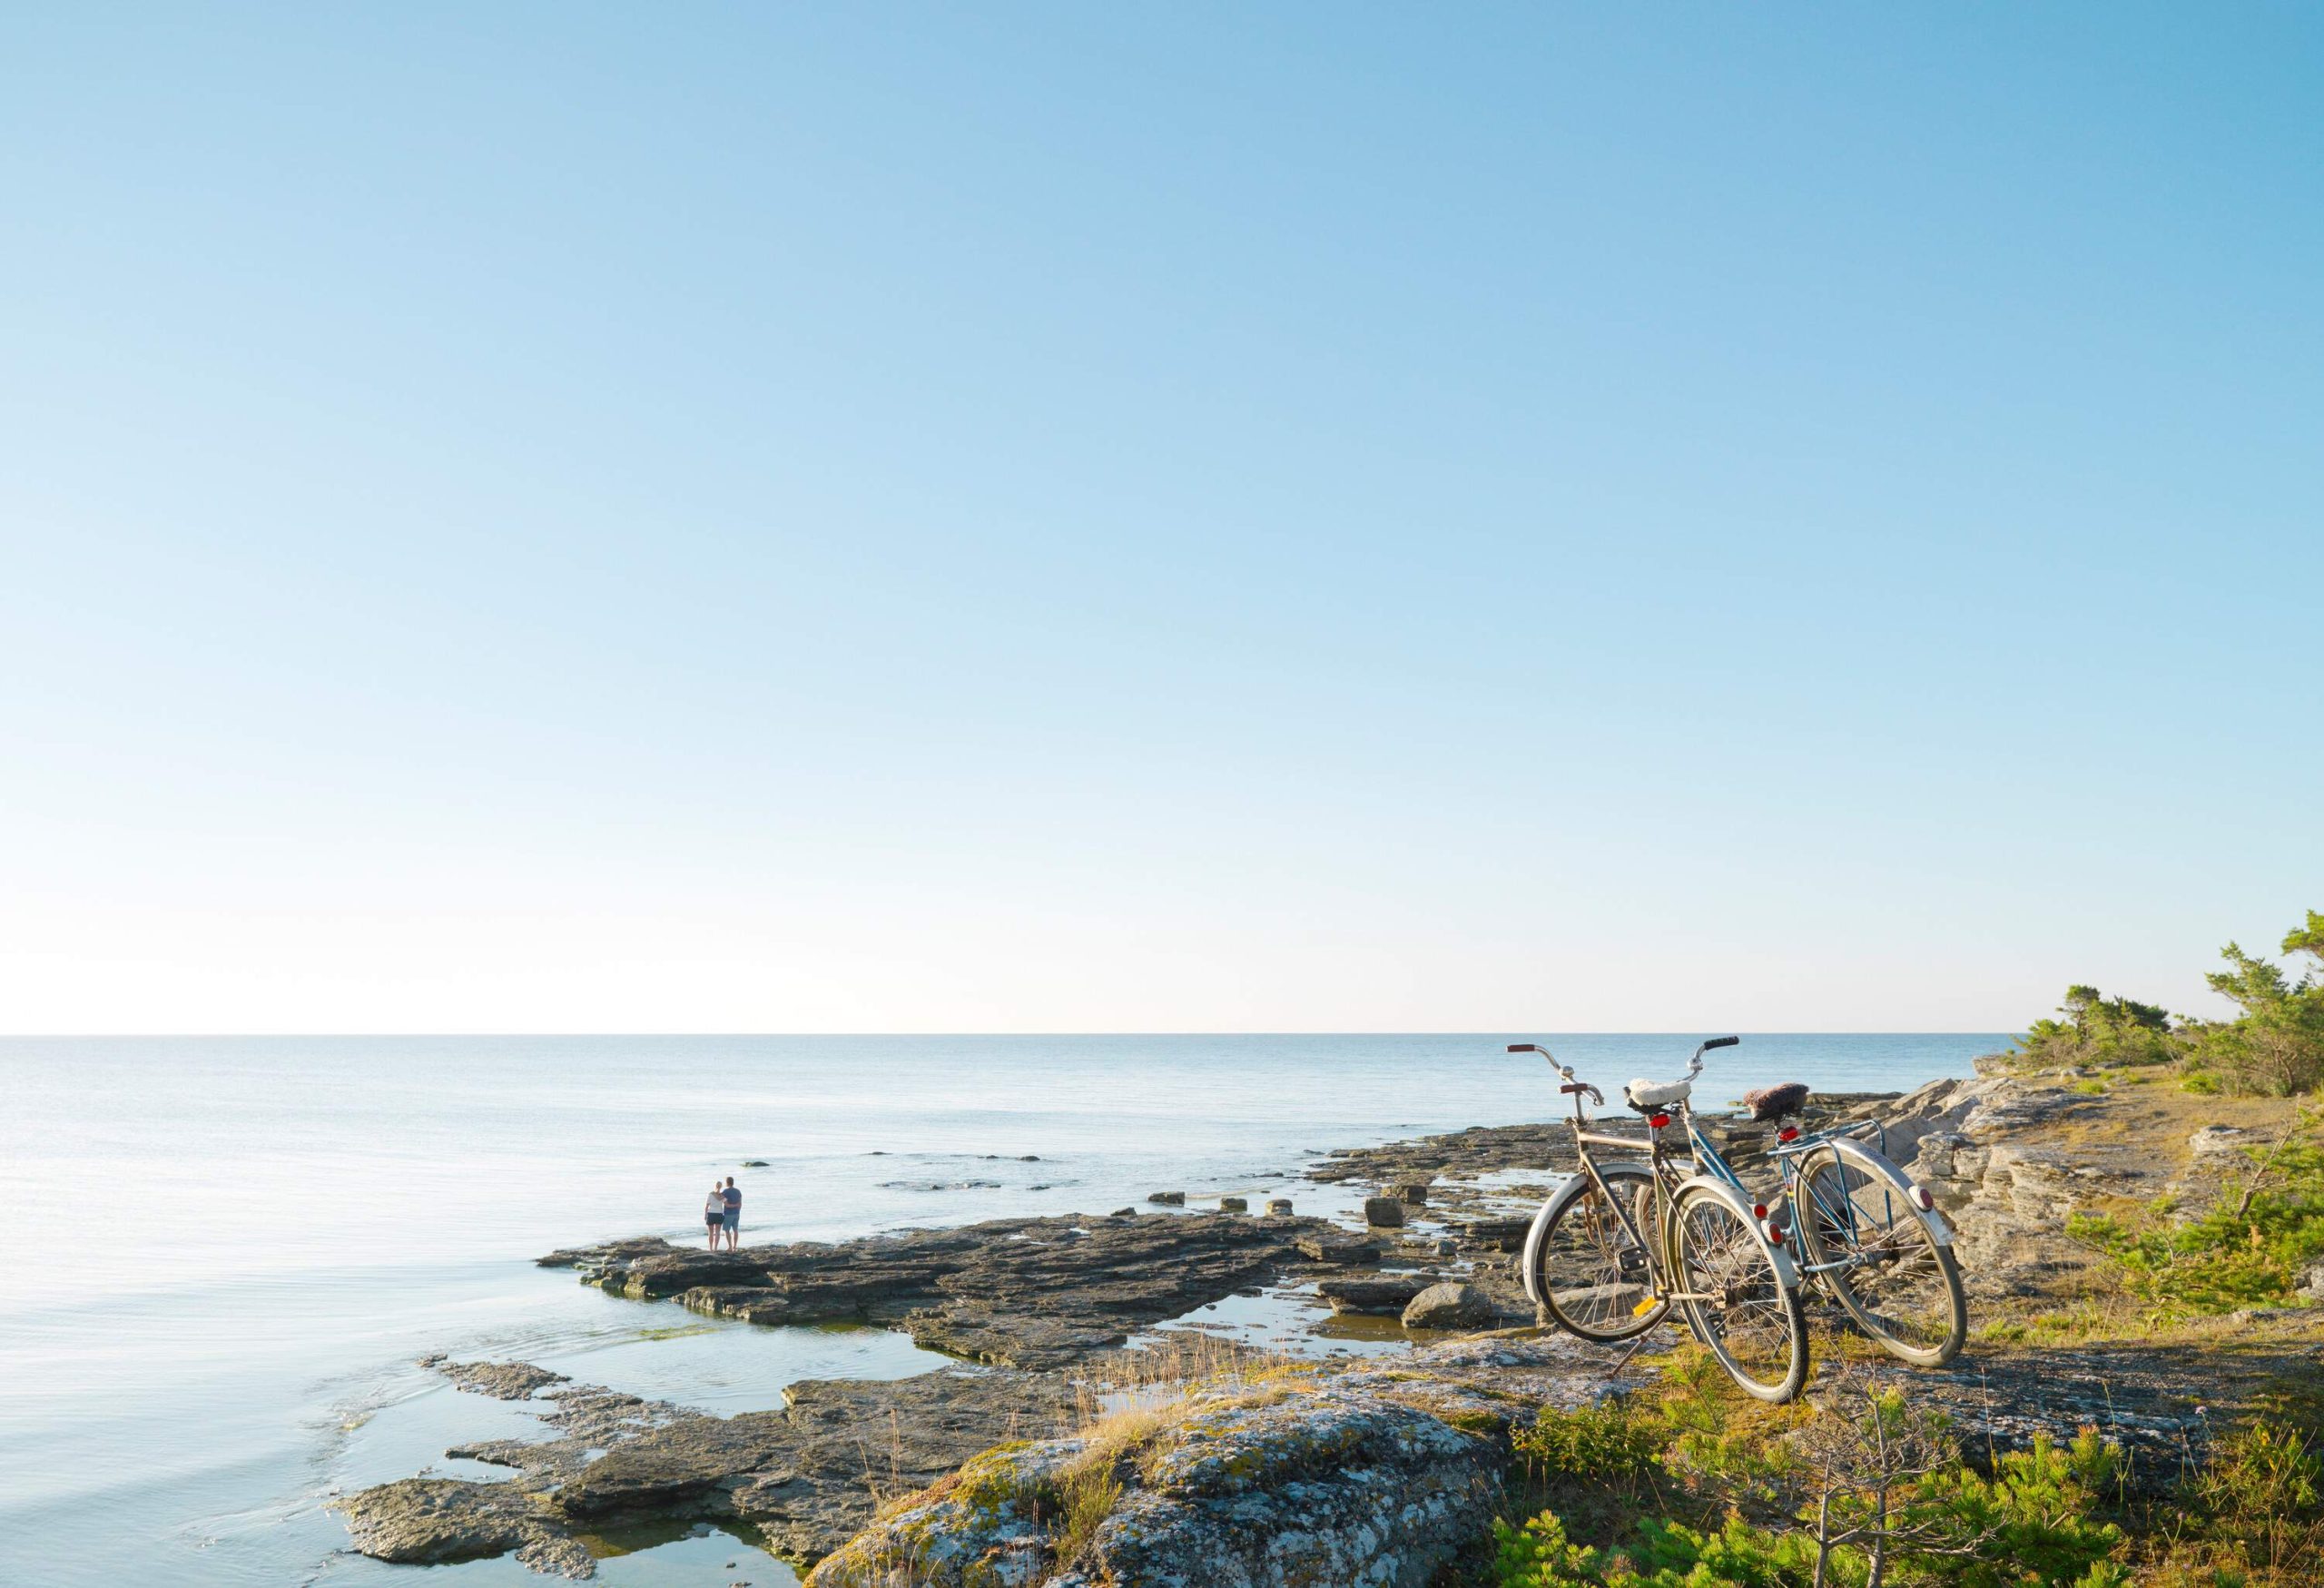 A couple stands on a rocky beach gazing out to sea with their bicycles parked in the foreground.